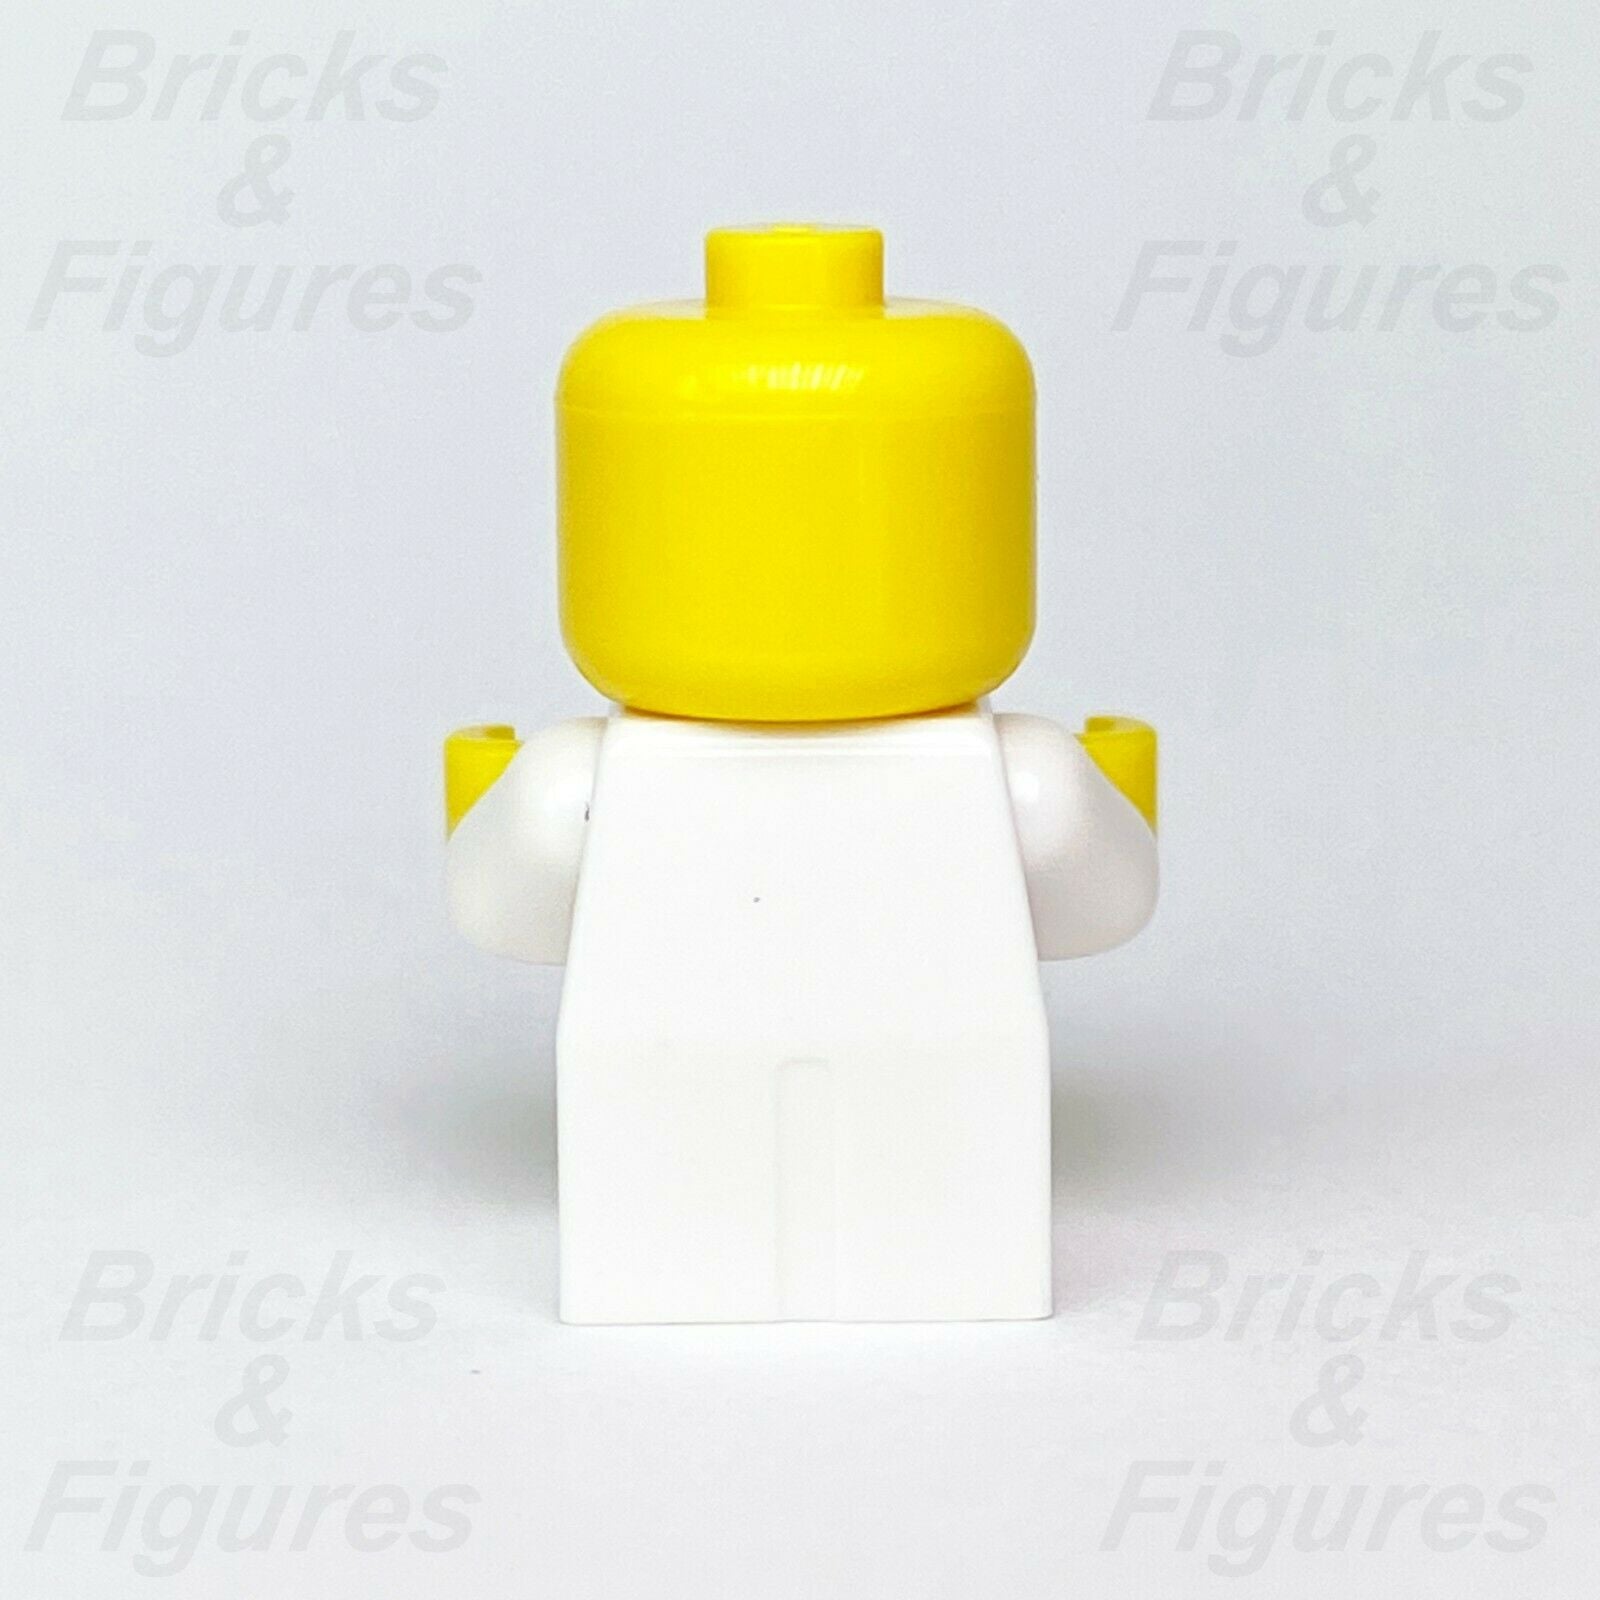 New Town City LEGO Baby with White Body Minifigure Recreation 60134 45022 10255 - Bricks & Figures